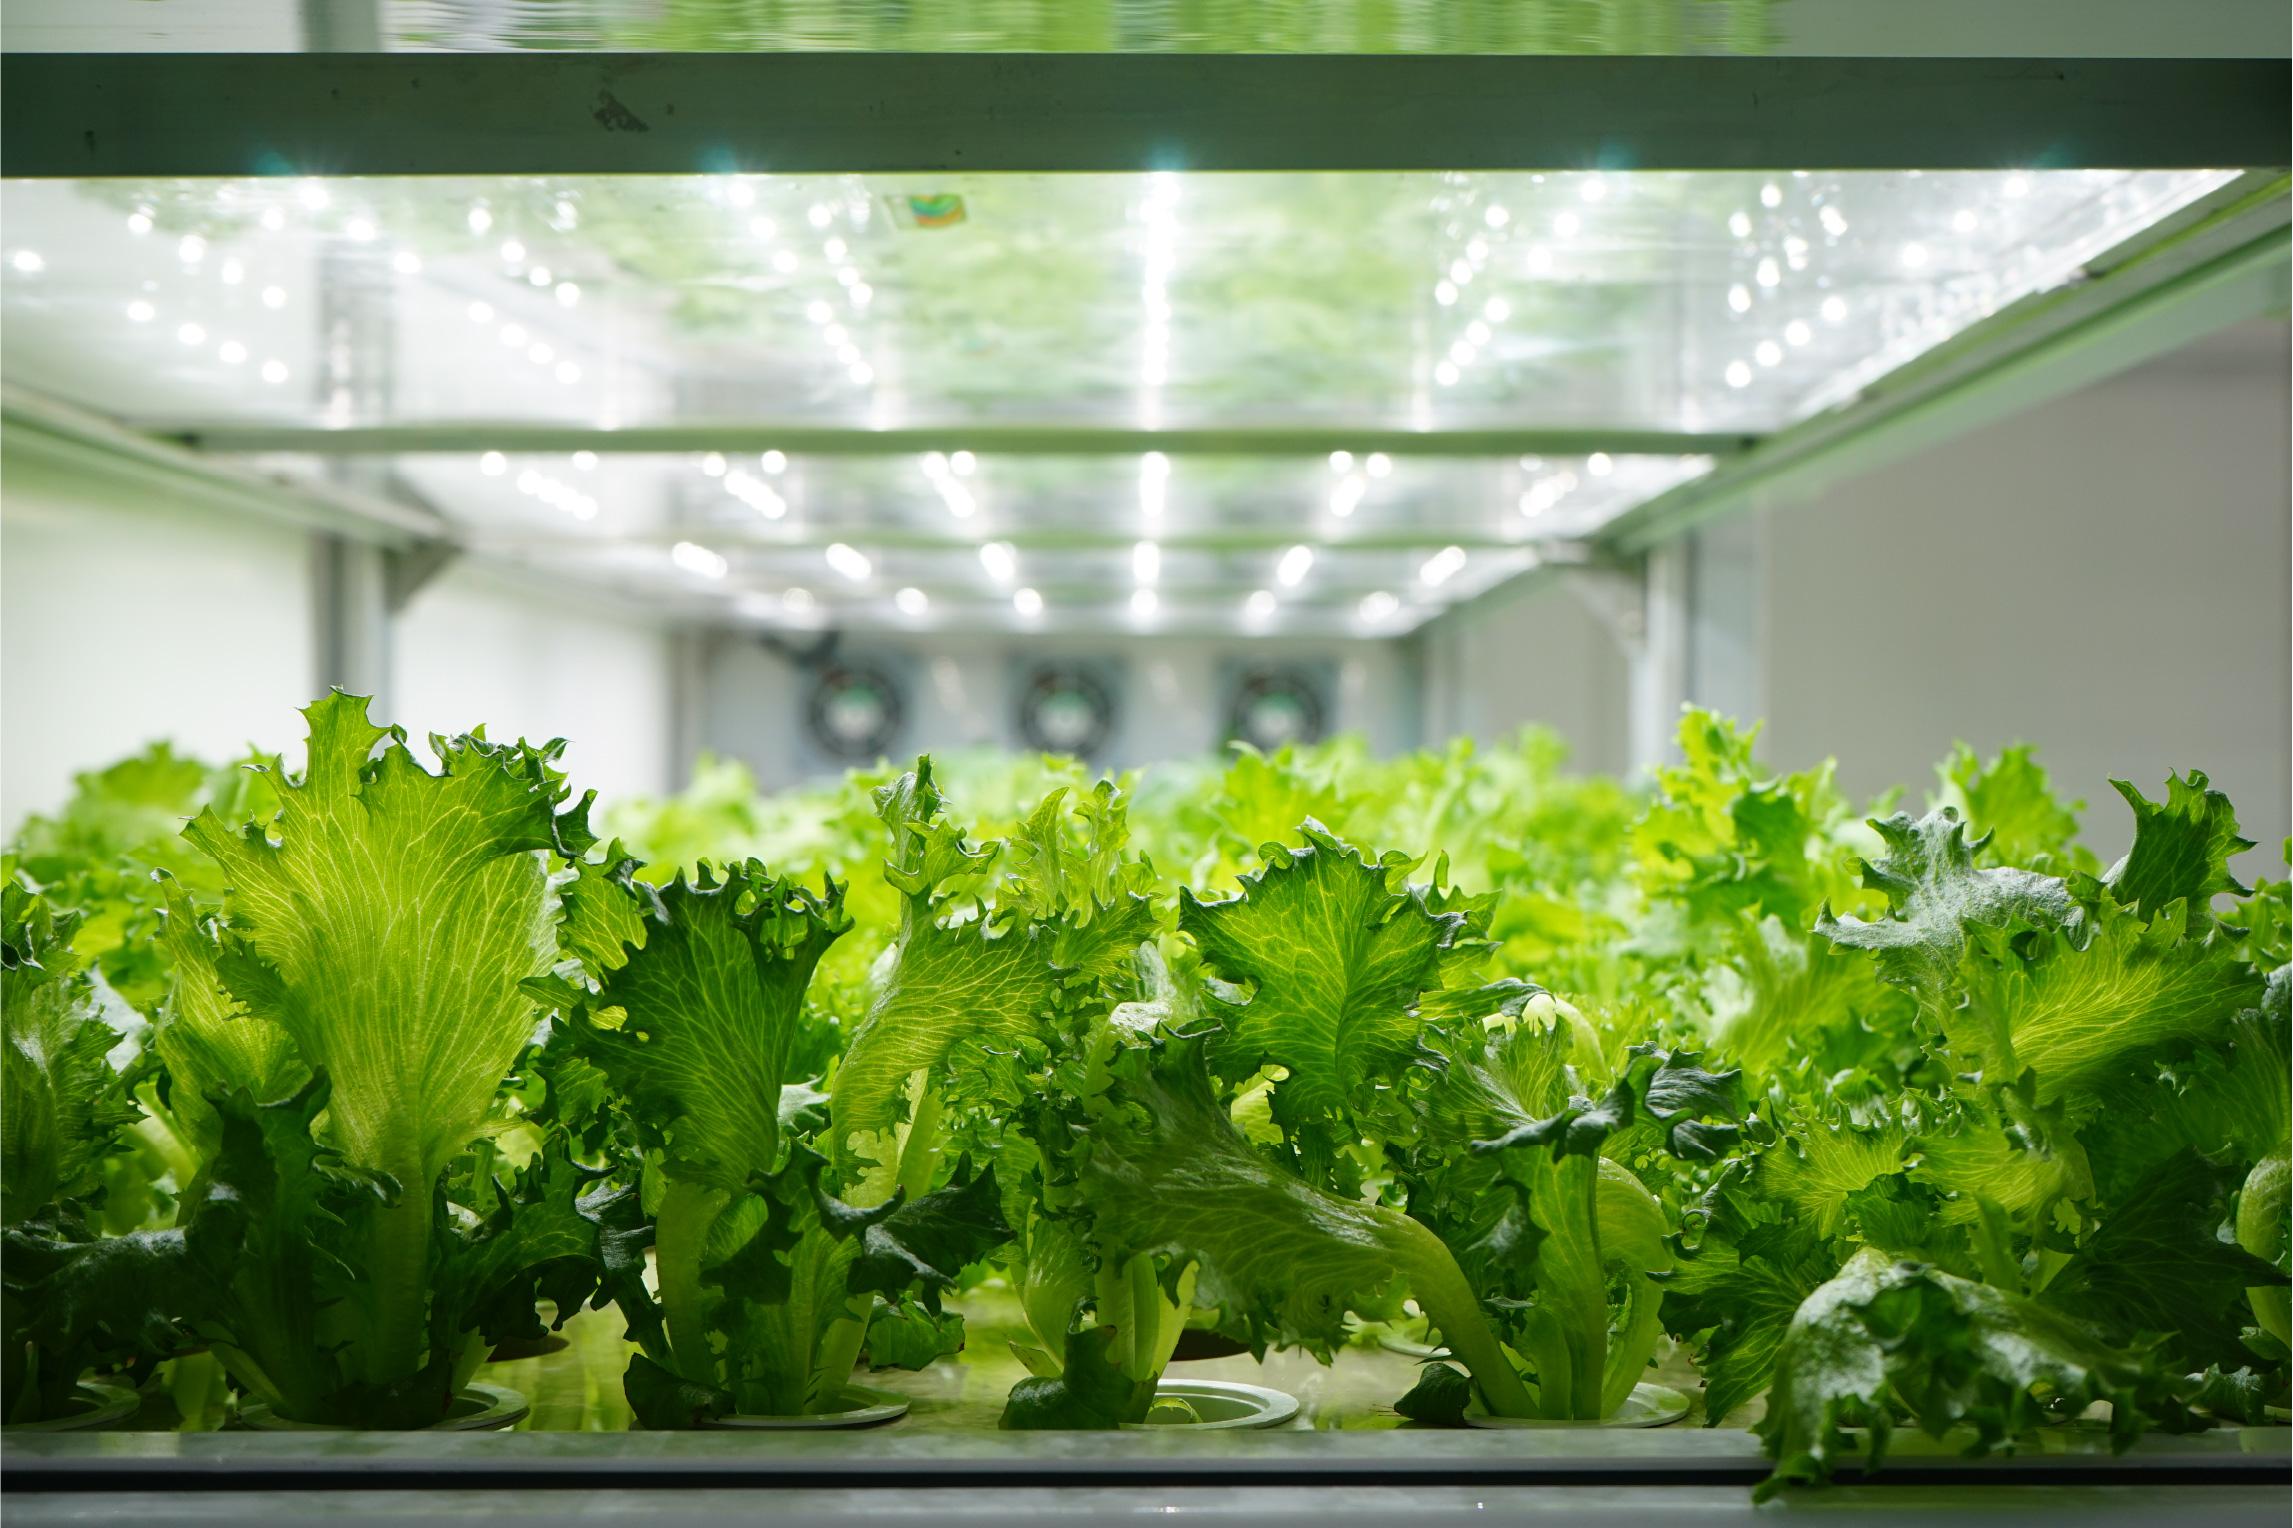 Lettuces grown with hydroponics